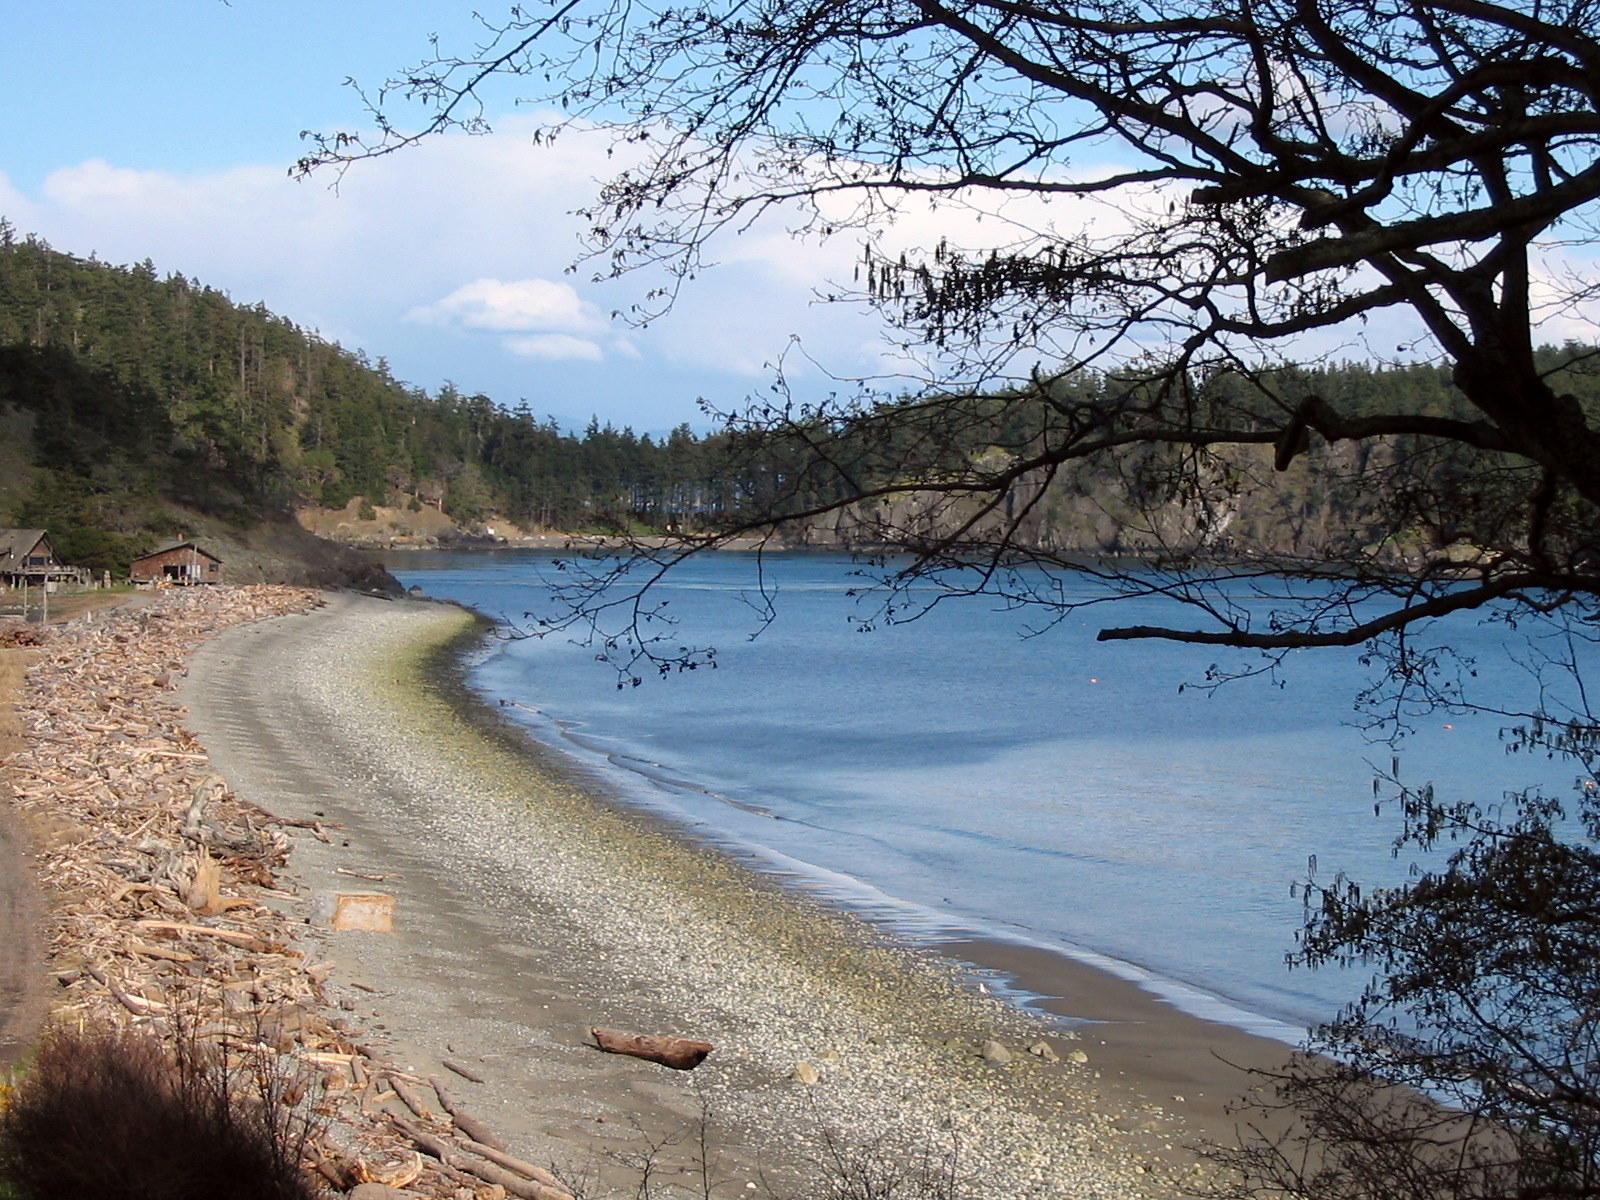 The outside beach on Decatur Island. Remarably sandy for a PNW beach and heavily laden with driftwood from winter storms